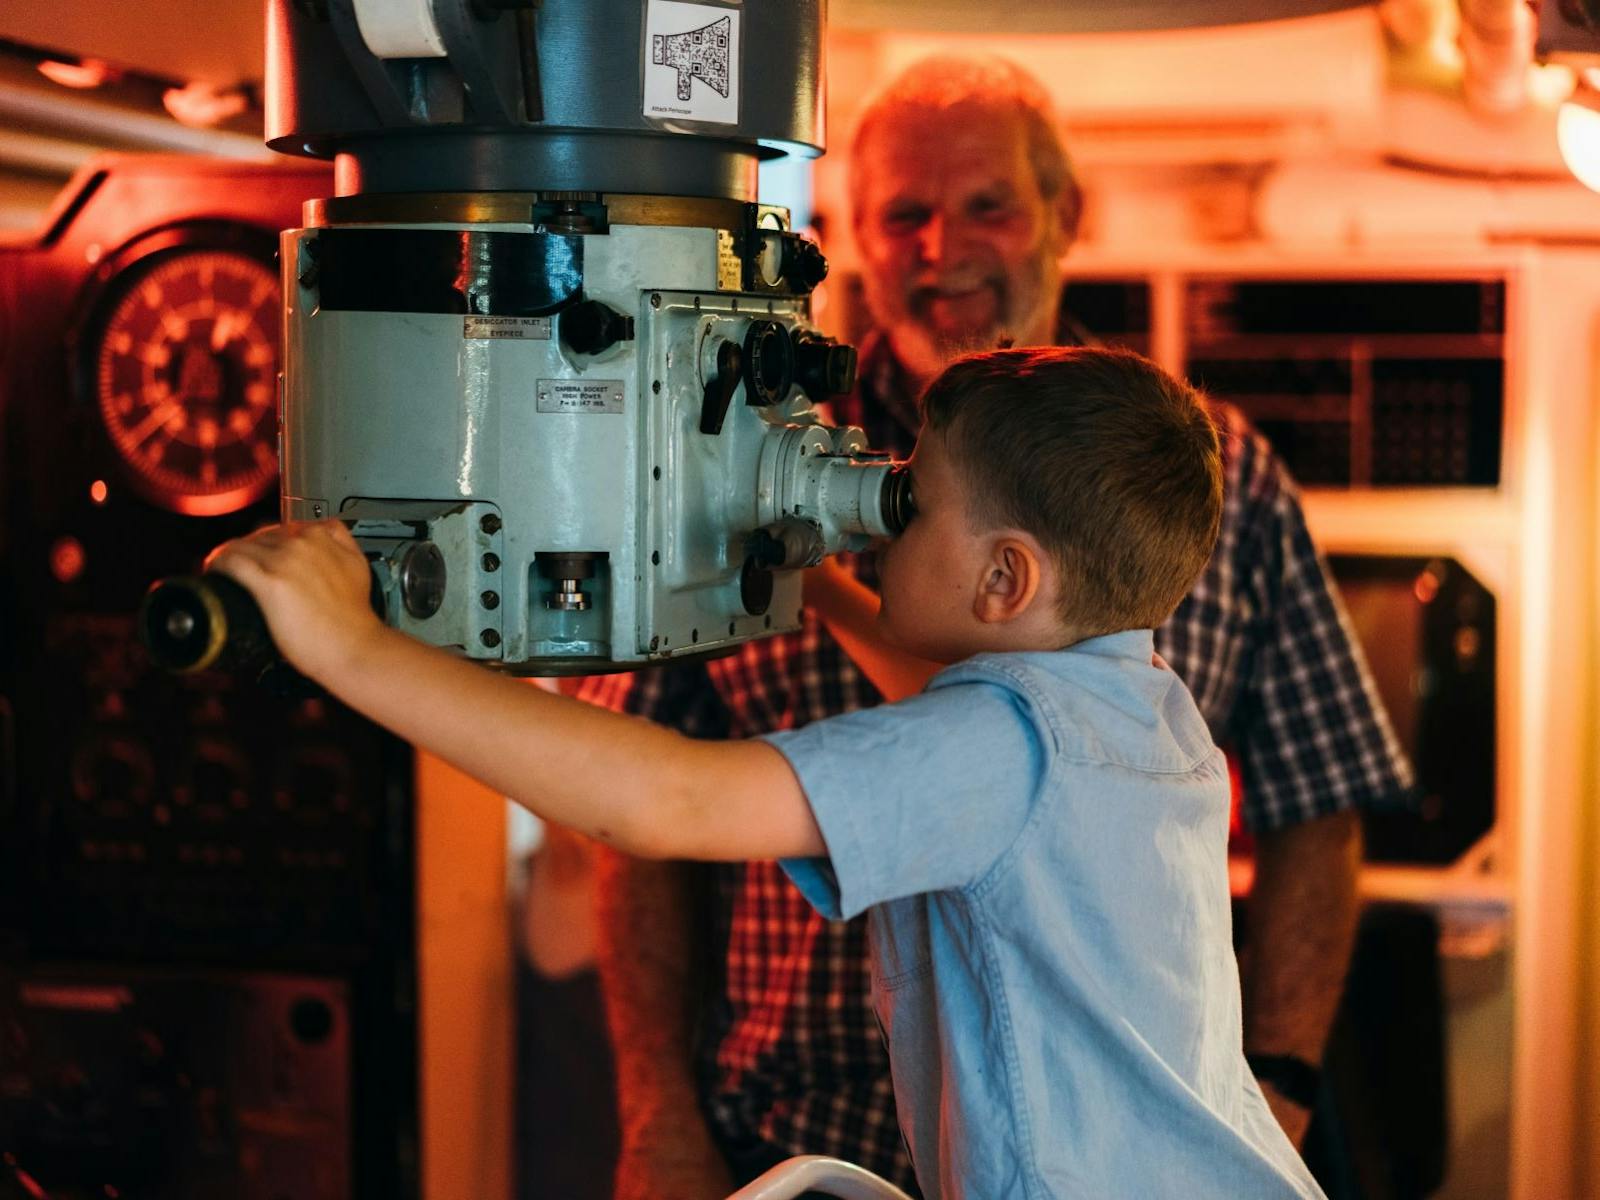 Boy looking through working periscope while grandfather looks on